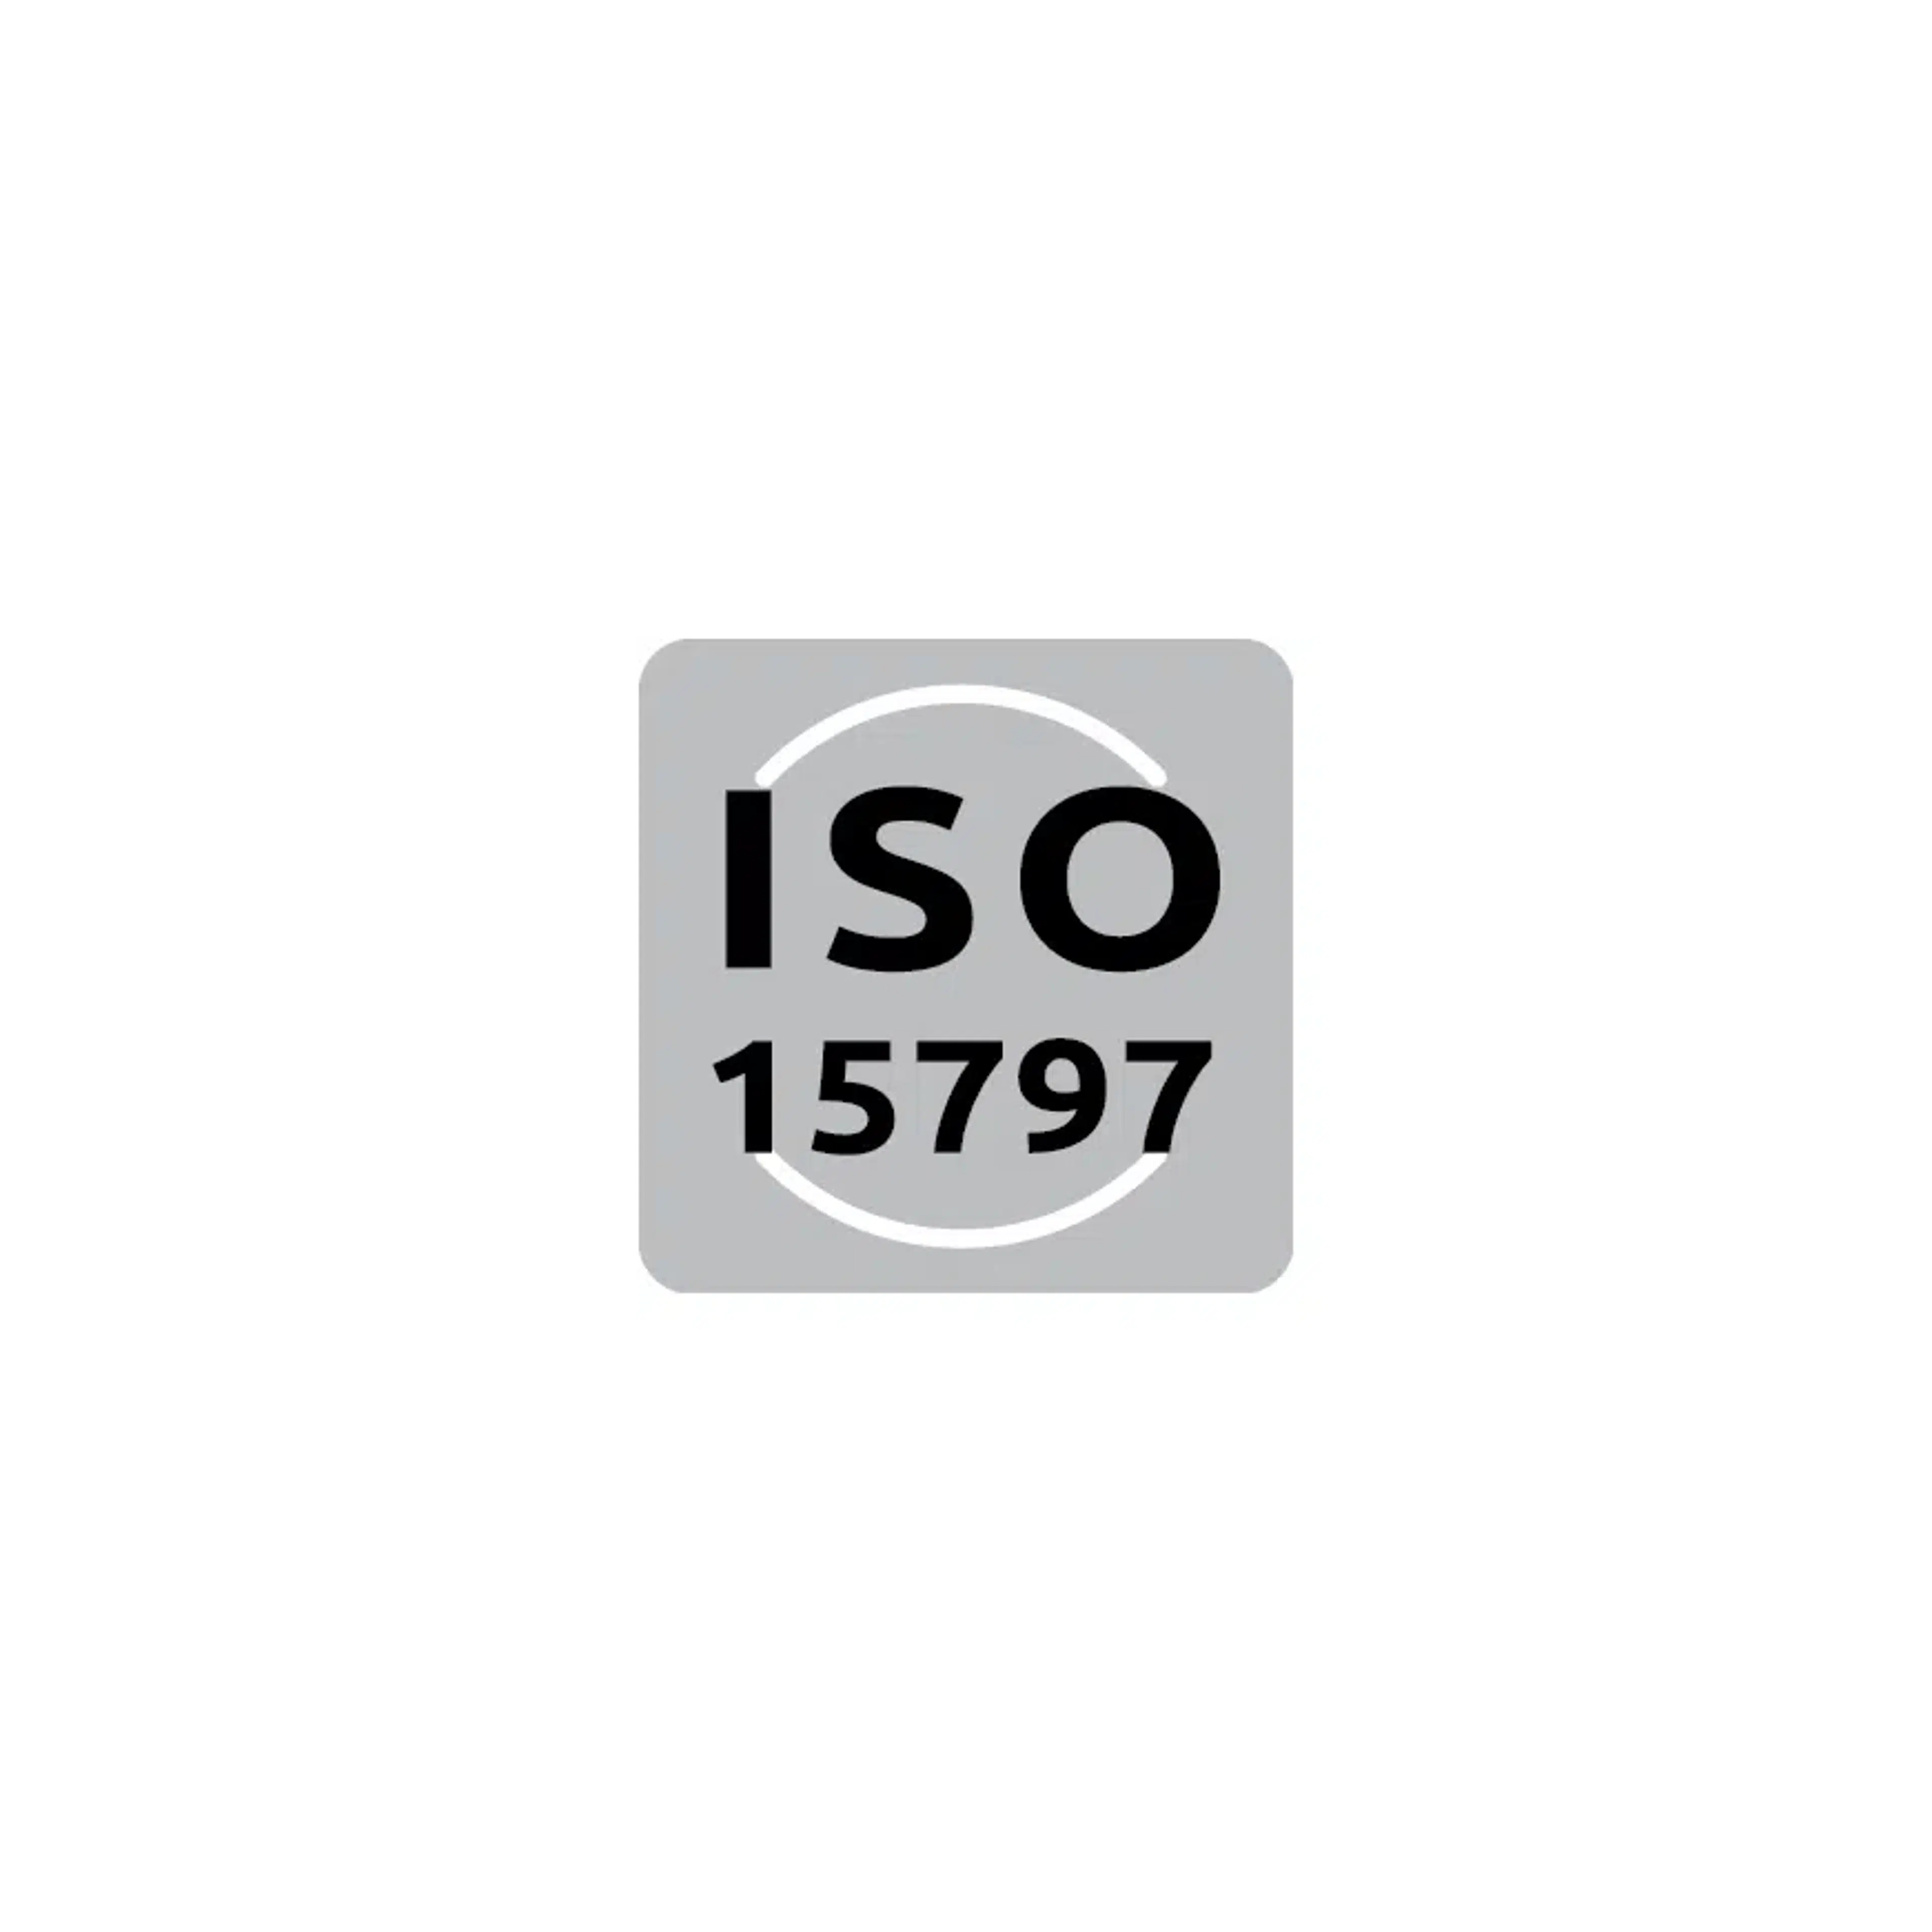 ISO 15797